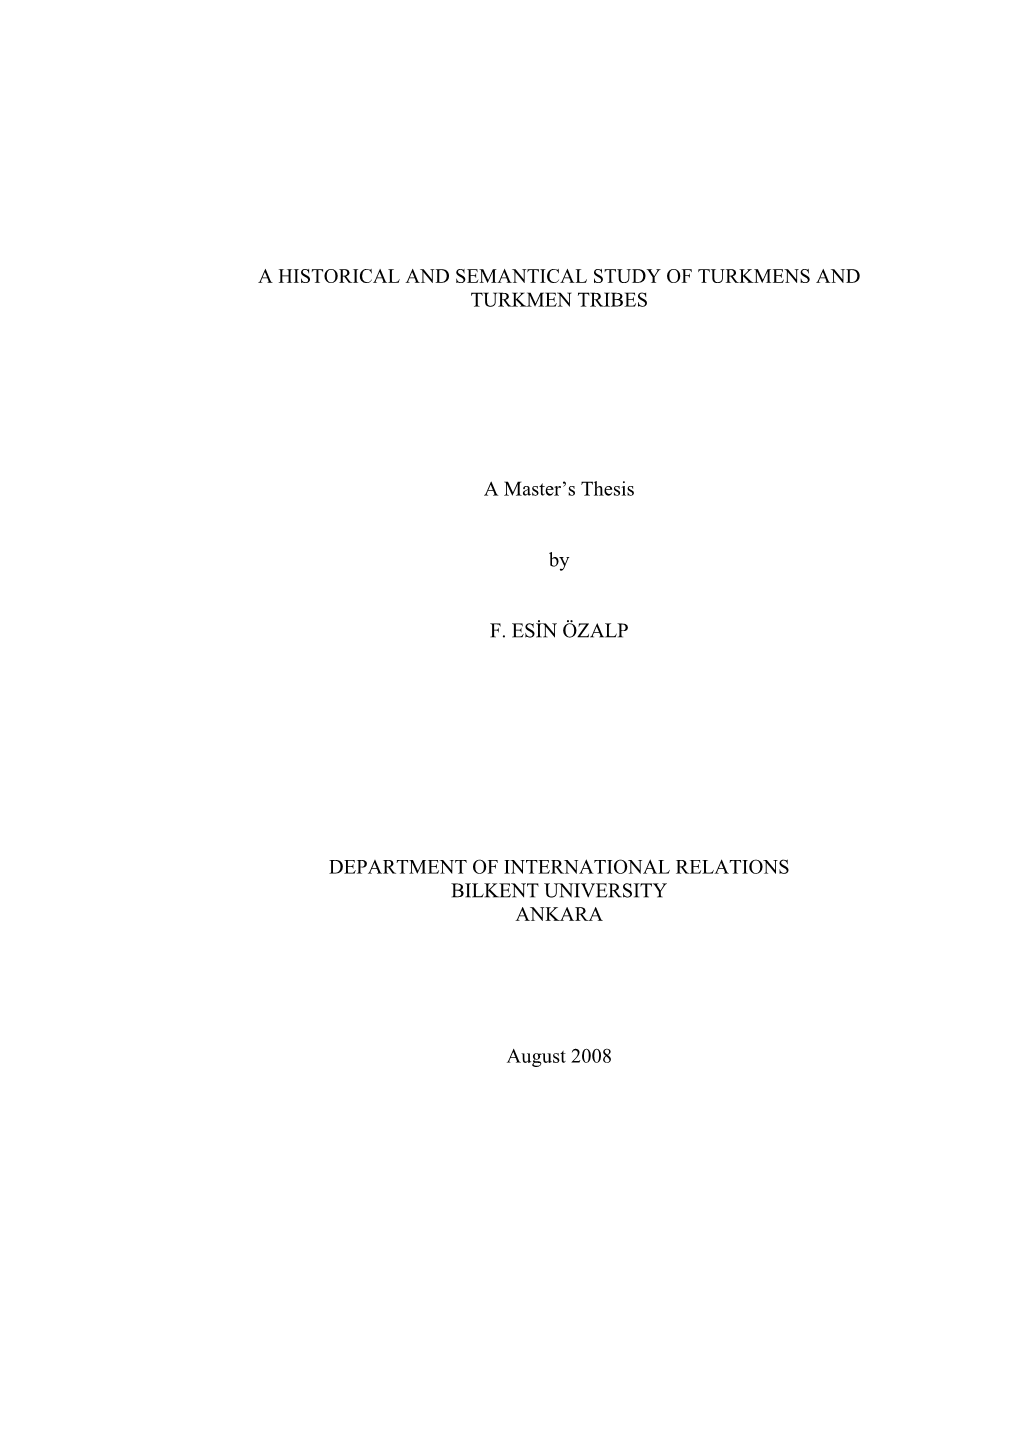 A Historical and Semantical Study of Turkmens and Turkmen Tribes